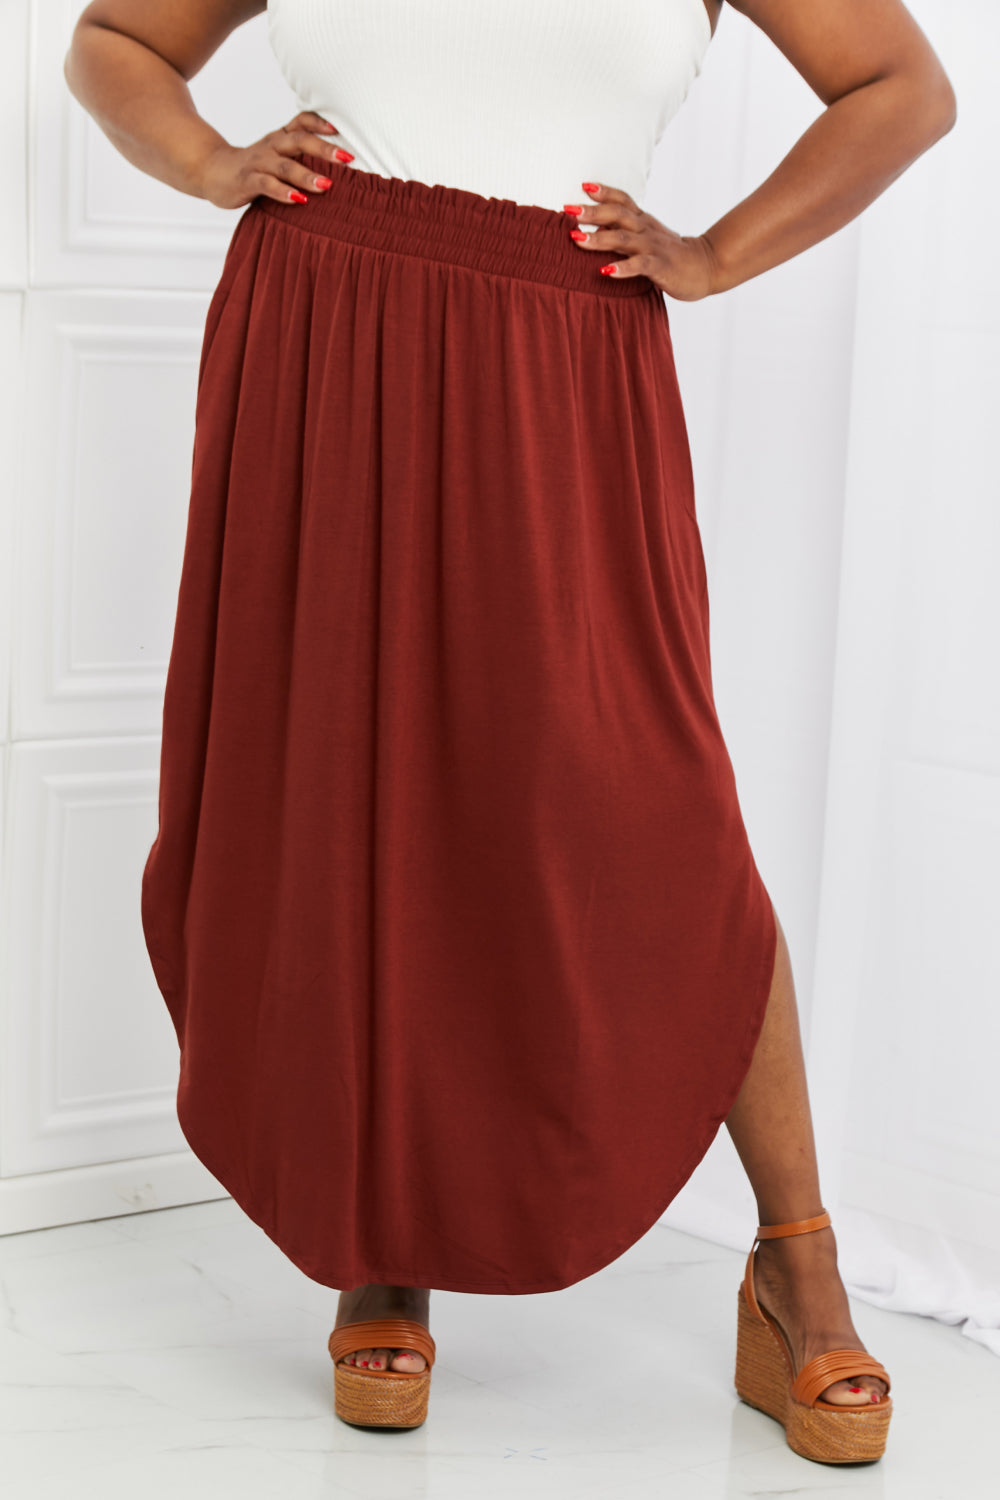 Zenana It's My Time Full Size Side Scoop Scrunch Skirt in Dark Rust - Coco and lulu boutique 